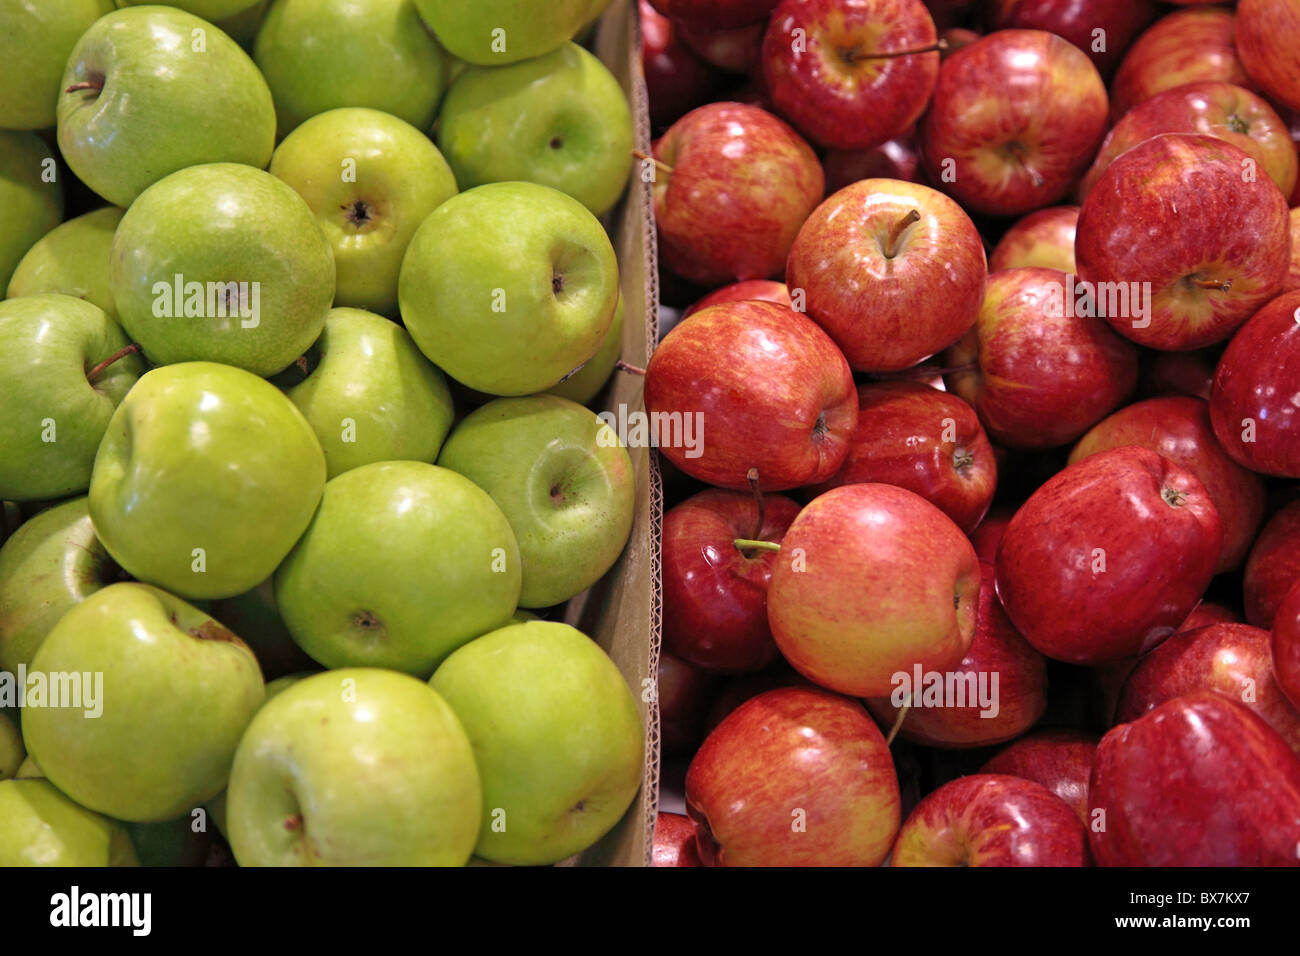 A market stall offering green and red apples. Stock Photo